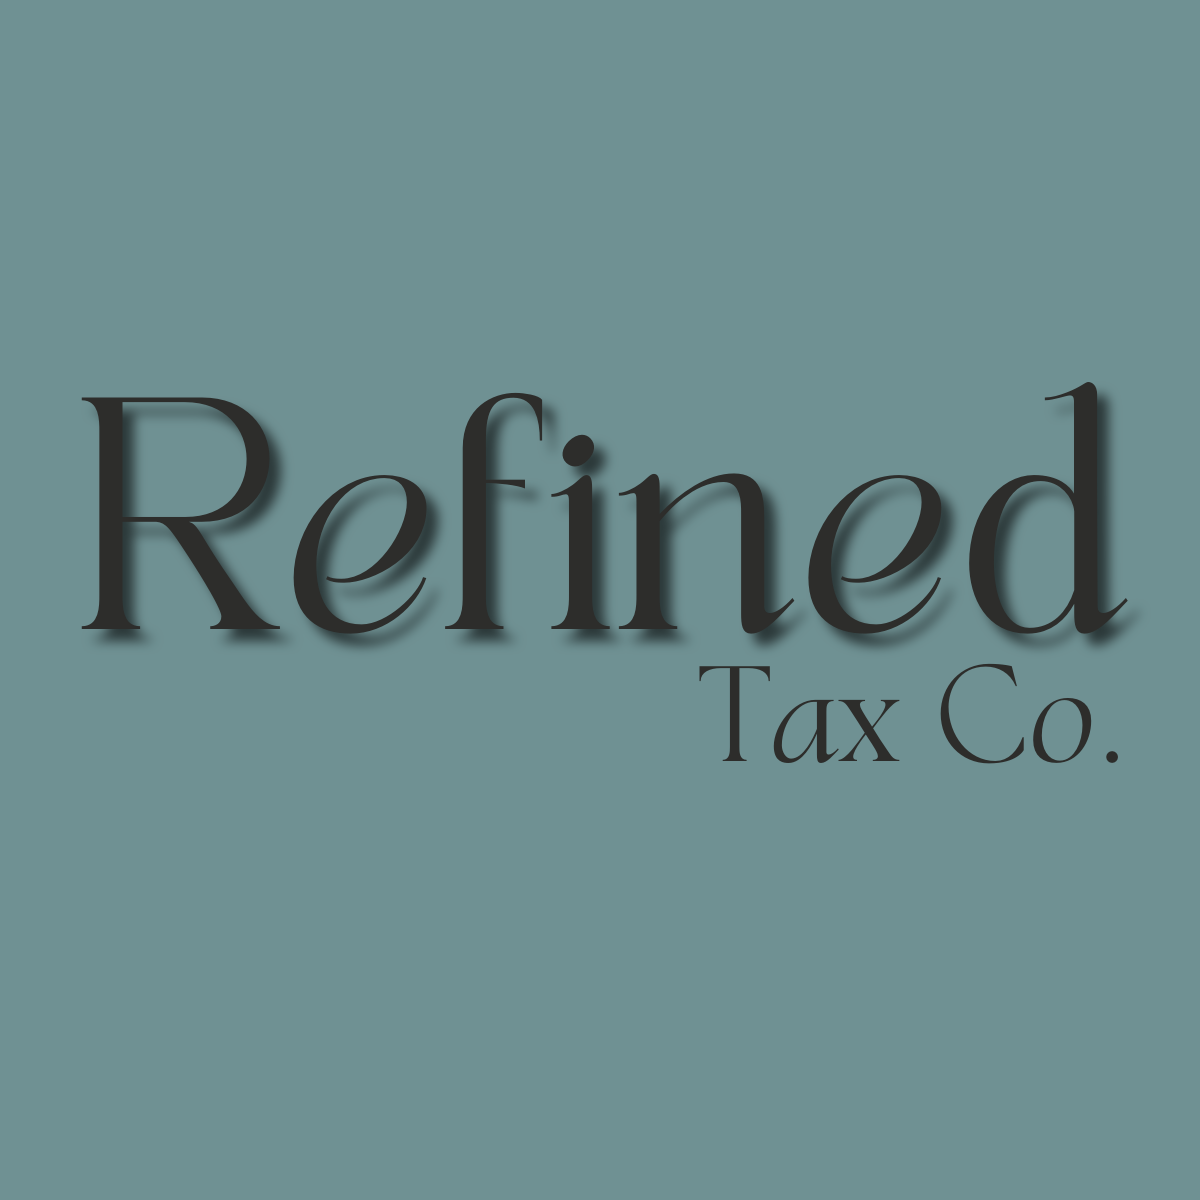 Refined Tax Co 110 Mineral Springs Rd, Ball Ground Georgia 30107